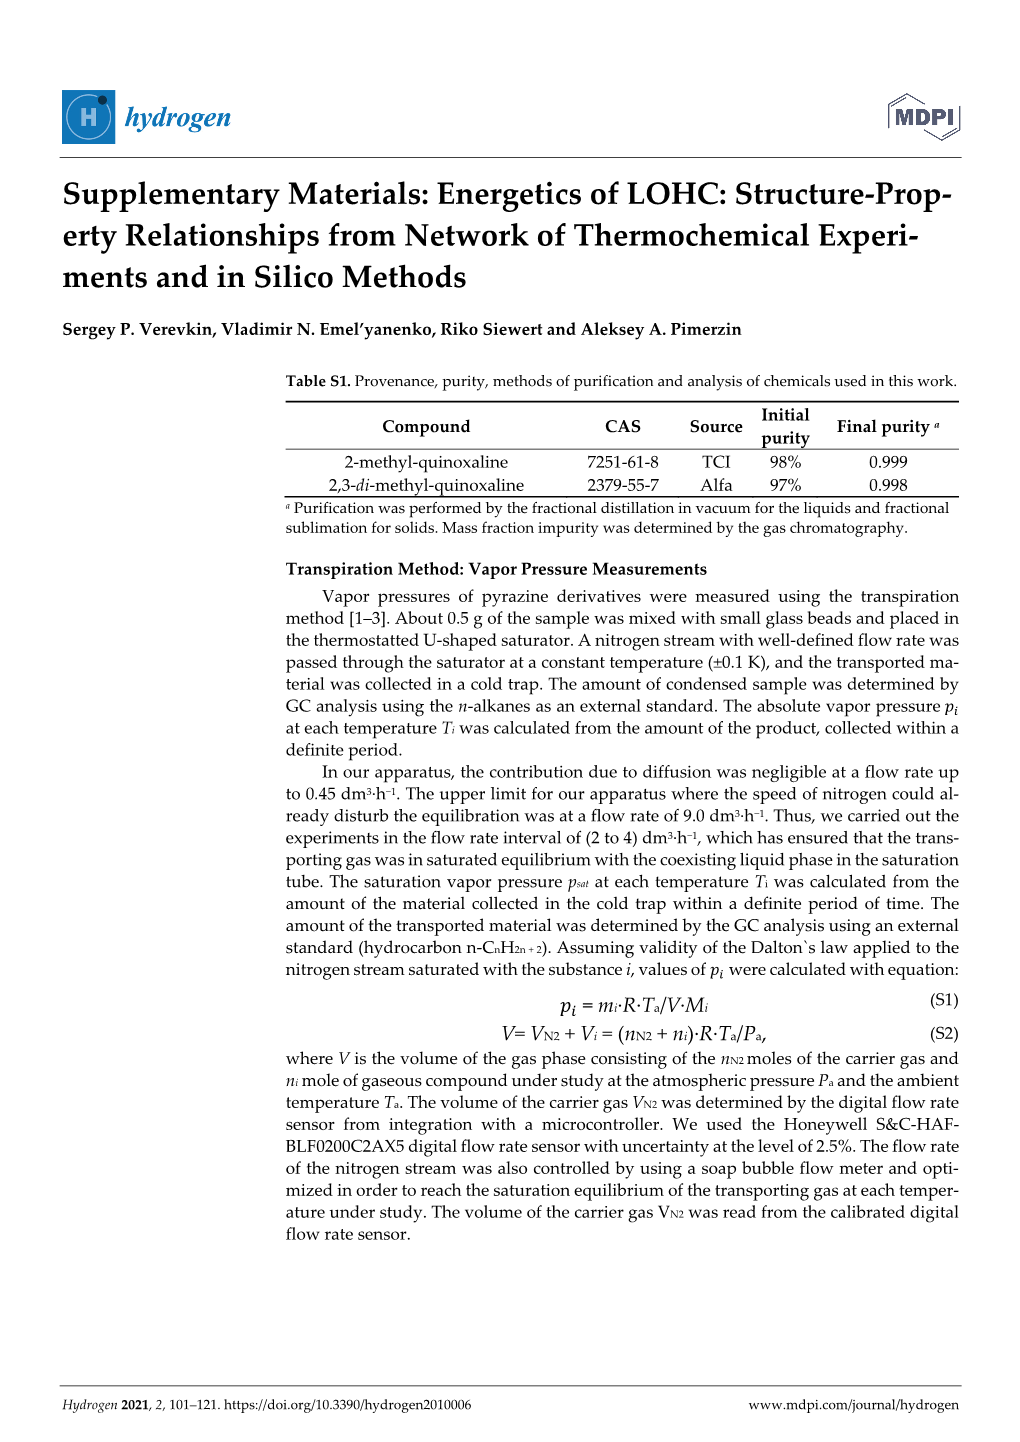 Energetics of LOHC: Structure-Prop- Erty Relationships from Network of Thermochemical Experi- Ments and in Silico Methods